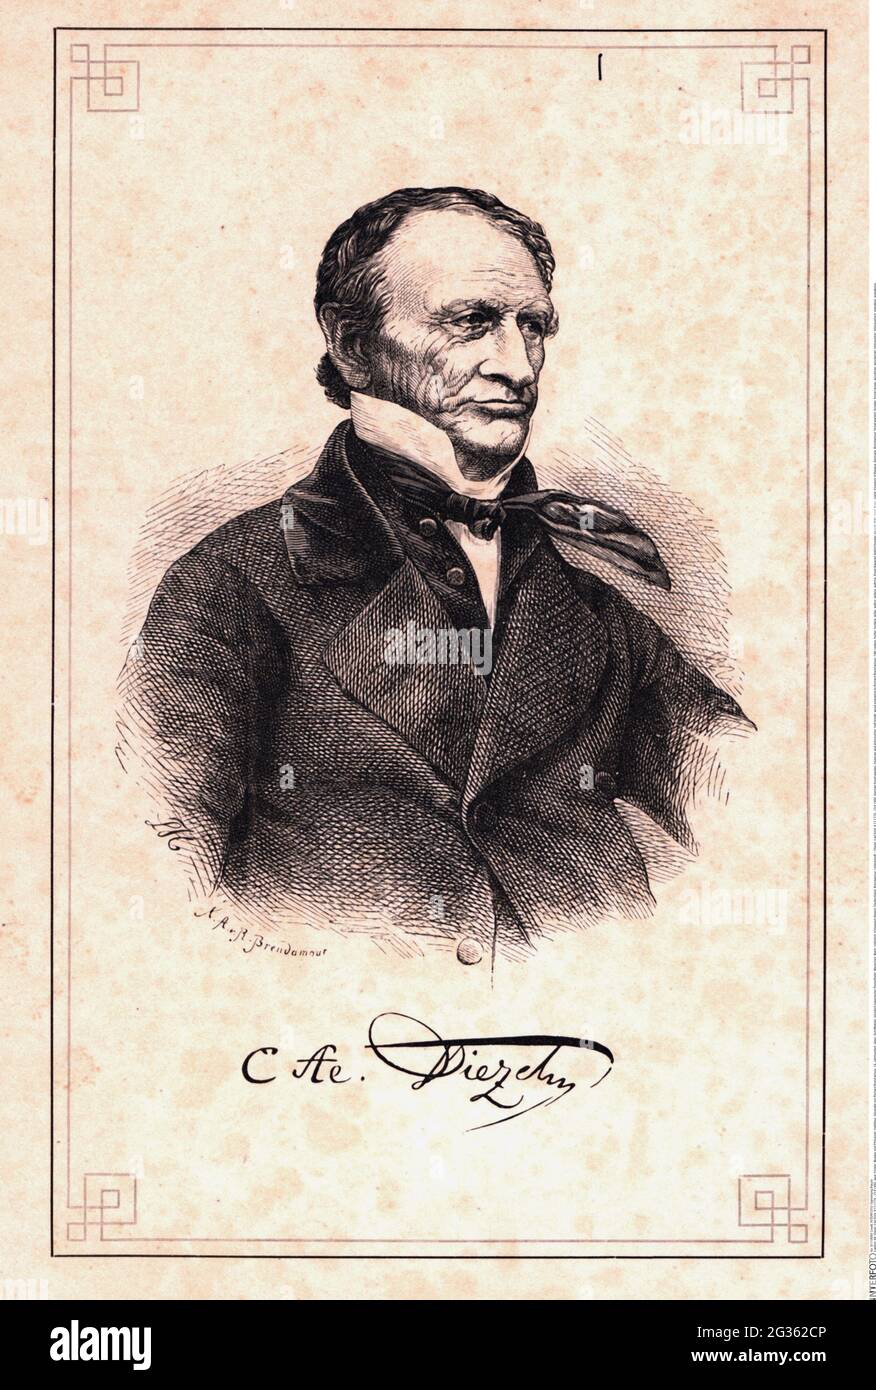 Diezel, Carl Emil, 8.12.1779 - 23.8.1860, German forest warden, musician and philosopher, half length, ARTIST'S COPYRIGHT HAS NOT TO BE CLEARED Stock Photo